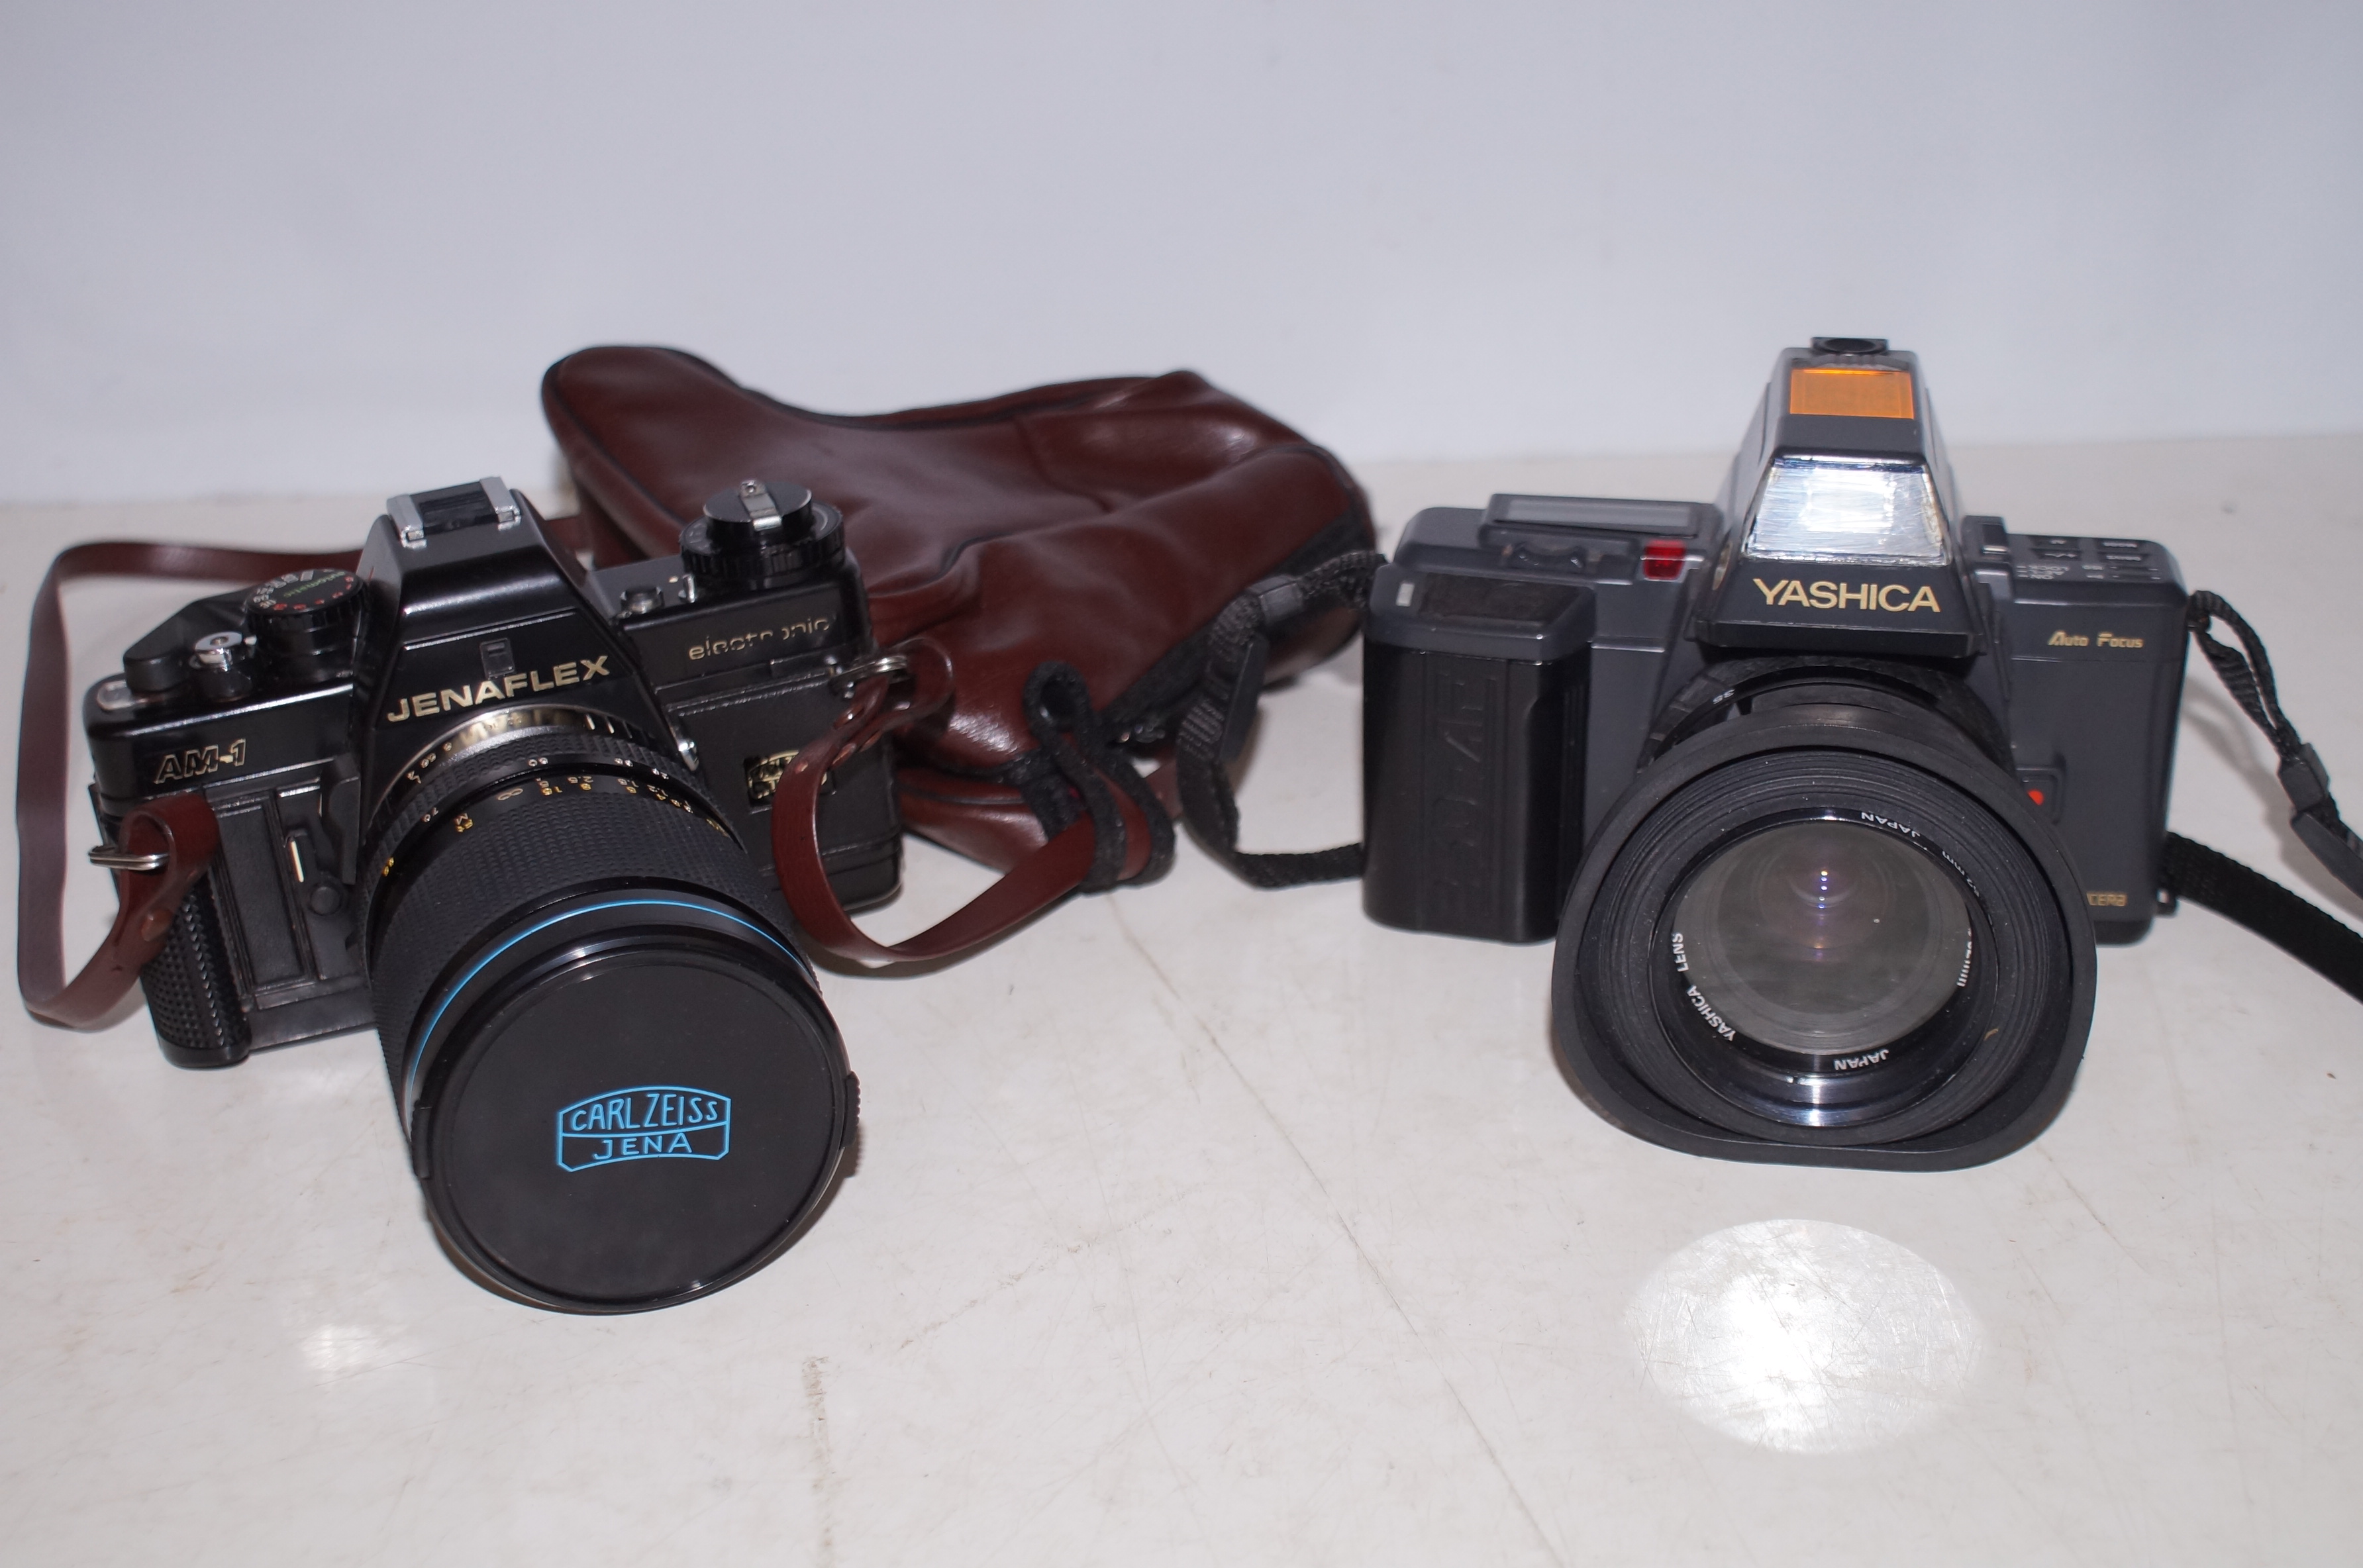 Zarl Zeiss Camera together with a Yashica Camera